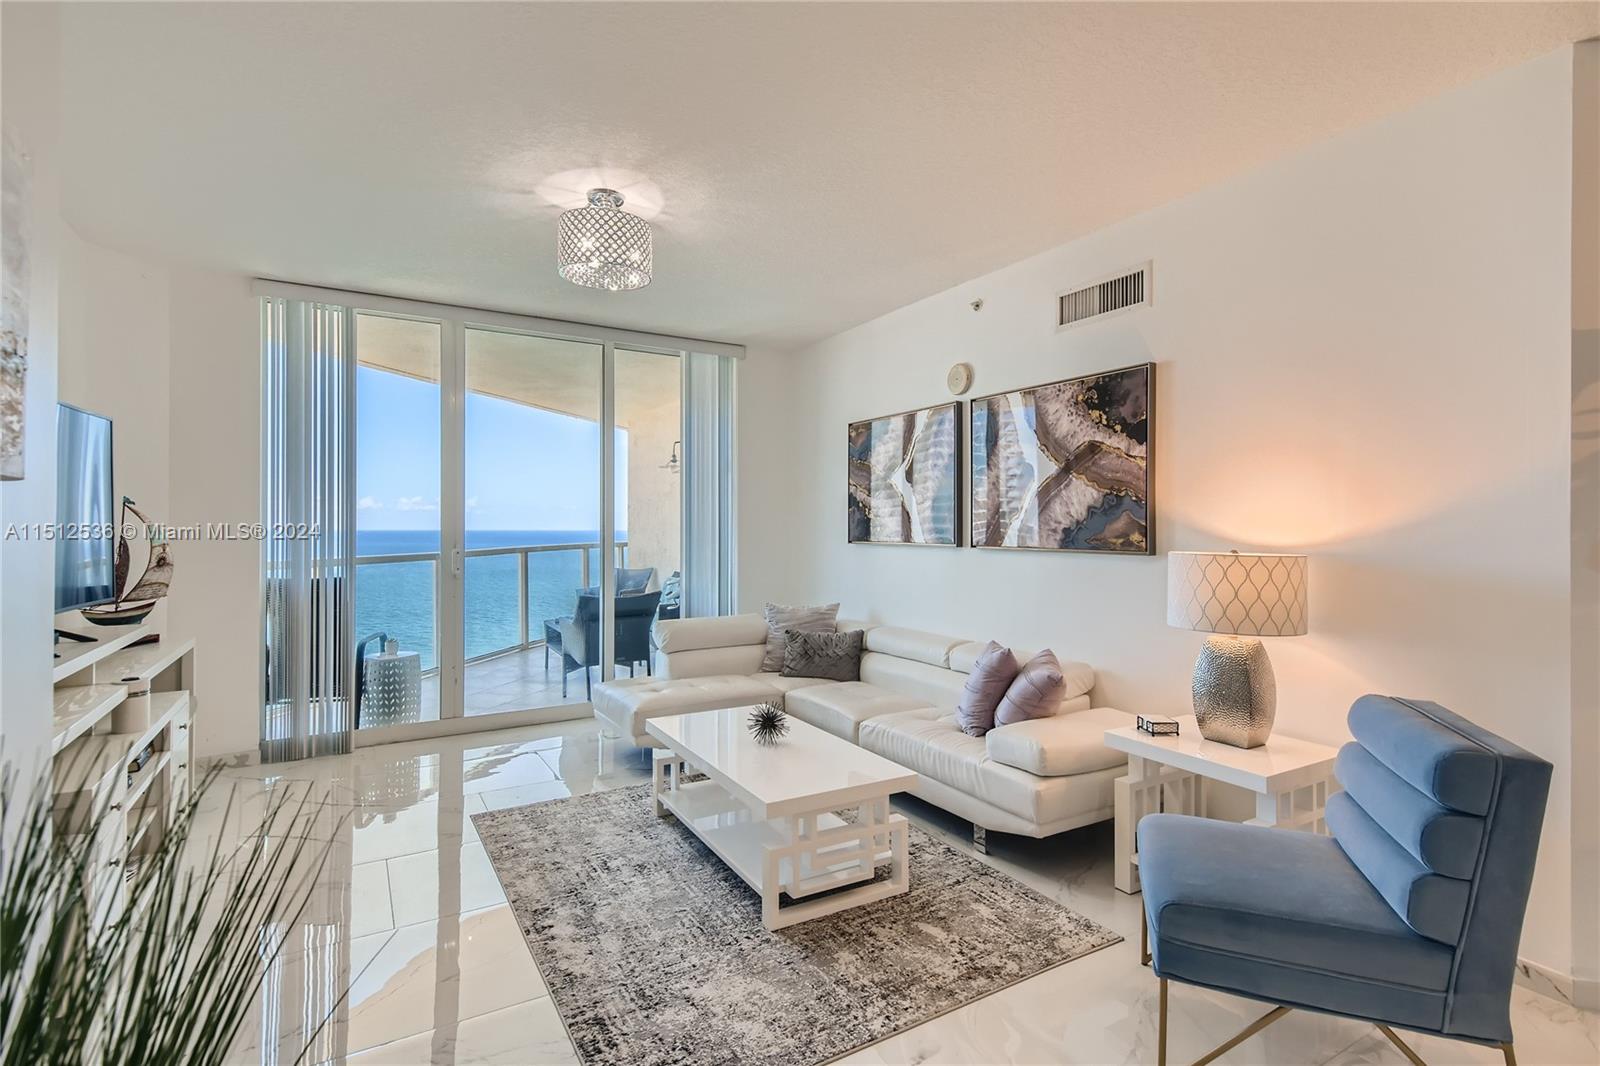 Spectacular views from this ocean front 2 bedrooms + Den unit! You'll enjoy being in the heart of Sunny Isles Beach w/expansive views of Atlantic Ocean & beautiful Intra Coastal views. One of a few units in building that has connecting balconies with access to both bedrooms and living room. Fully furnished, 3 tv's, washer & dryer inside unit, fully equipped kitchen, gym with ocean views, billiard room, pool, towel & beach service. King size mattress on master bedroom. Access within walking distance to stores, restaurants & Sunny Isles Pier is located right across from the building. Situated within a 10 min to Aventura Mall, Bal Harbor, Oleta Park, Gulfstream Park, Miami & Ft. Lauderdale airports. Short term license #STR-00349 Available as 9/1/24